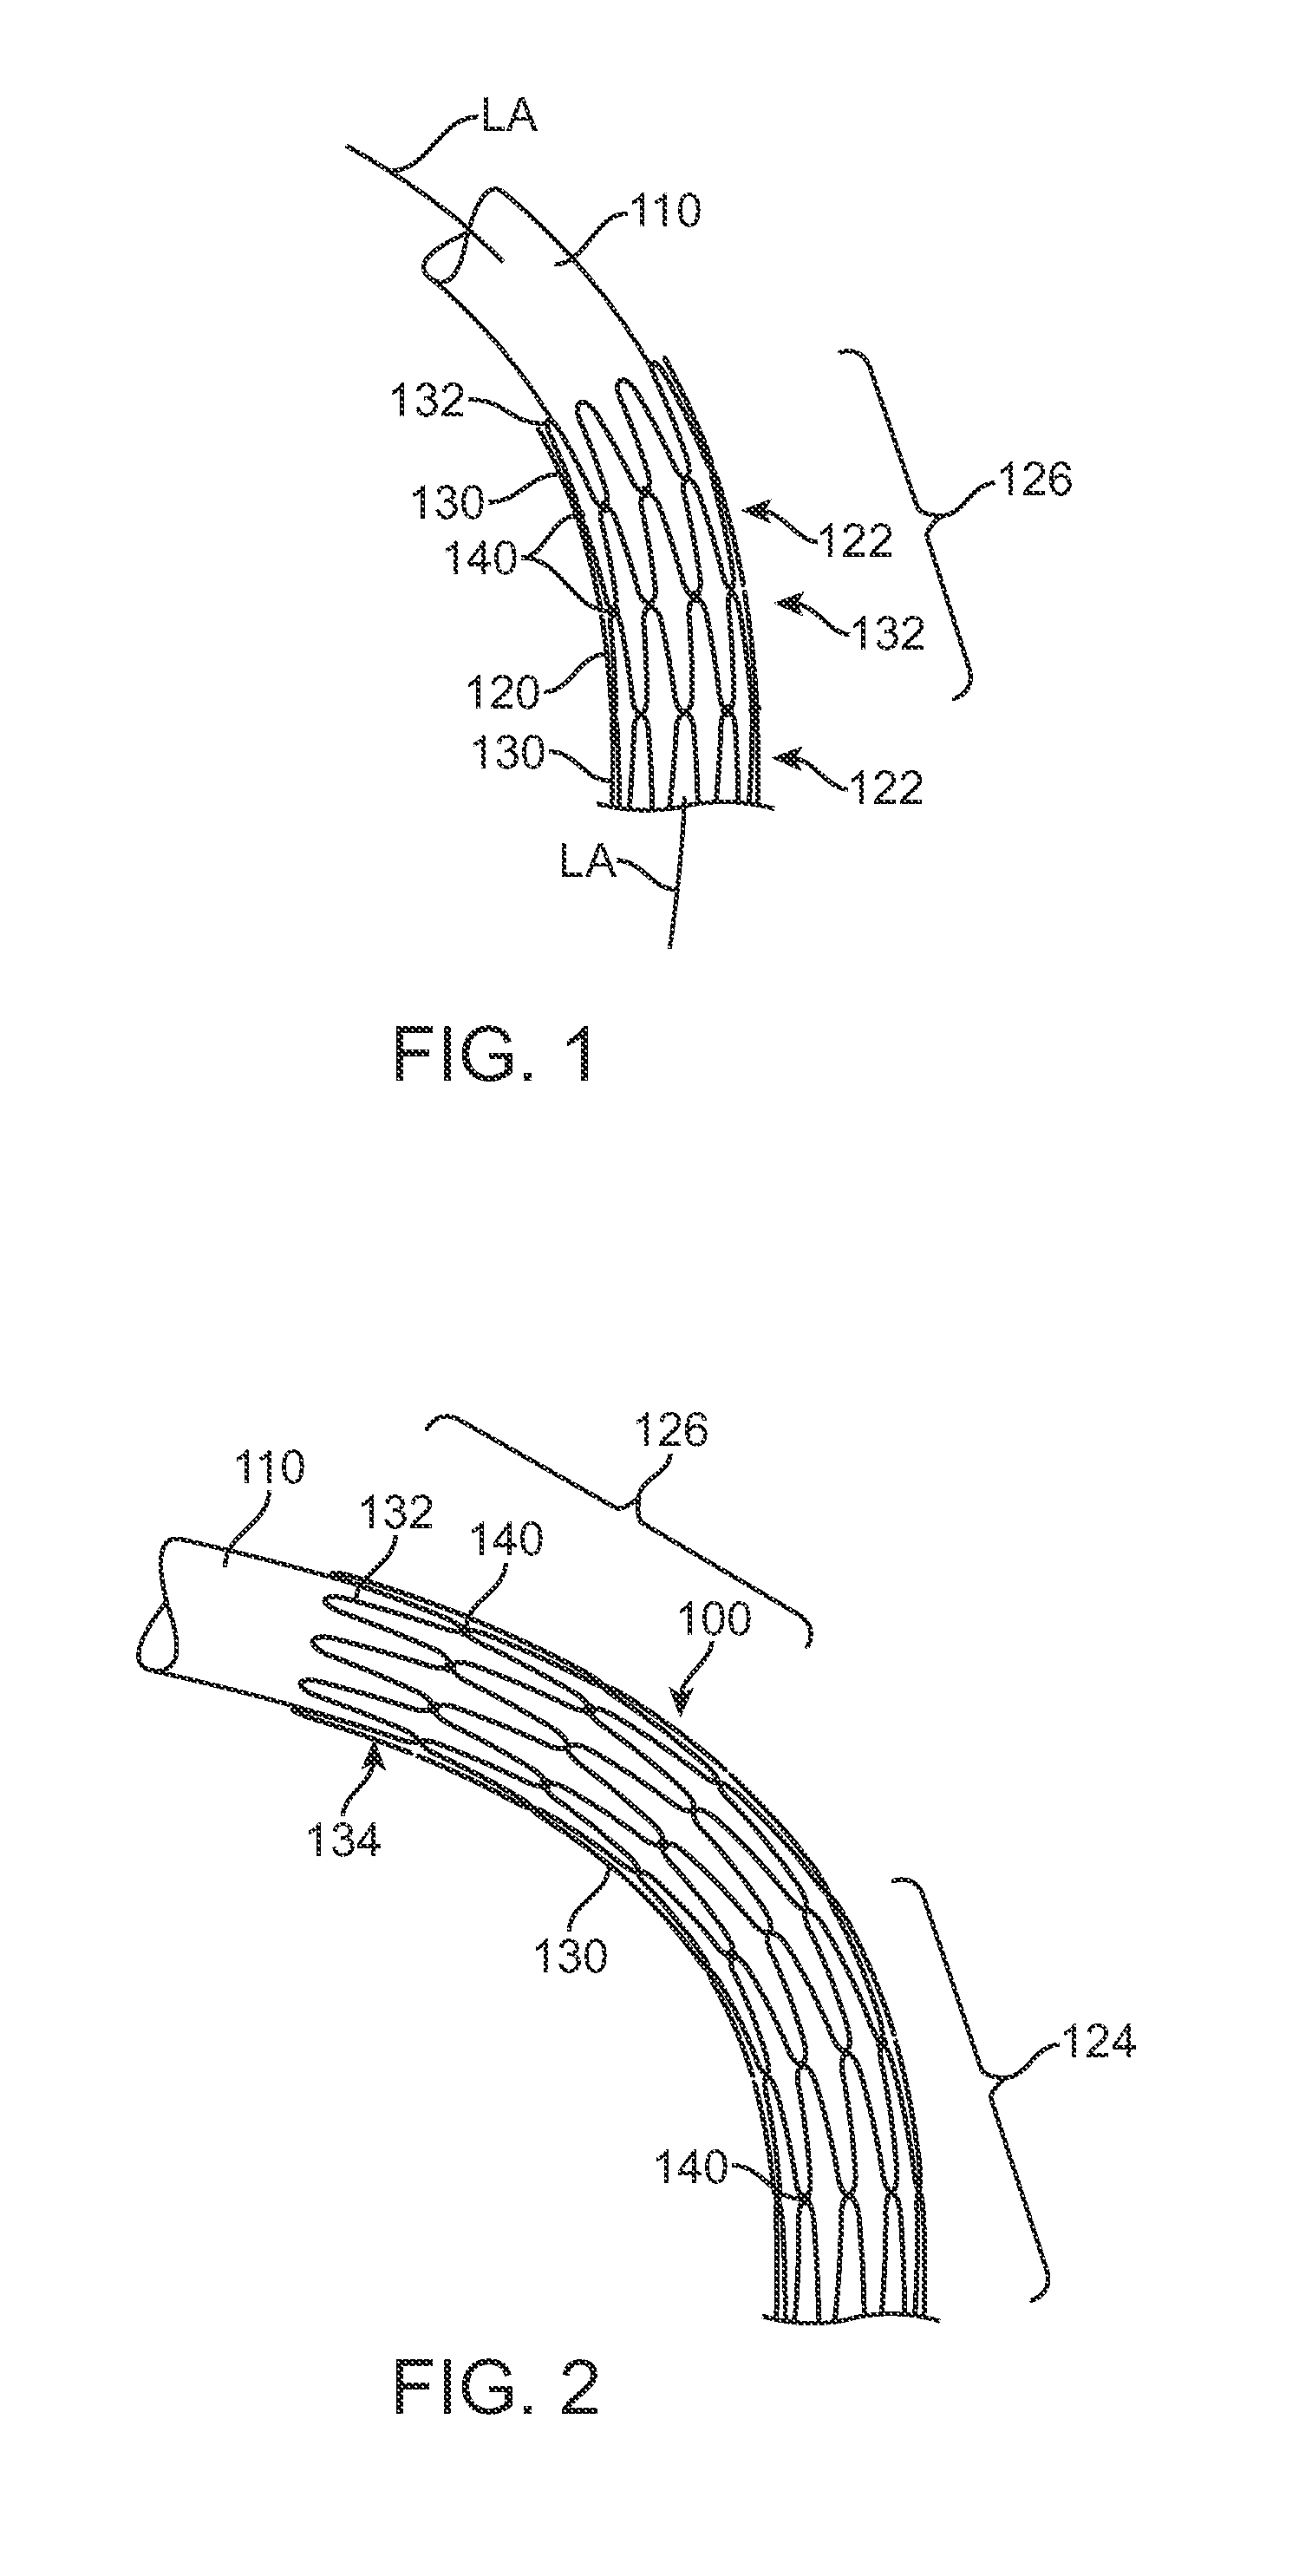 Stent With Constant Stiffness Along the Length of the Stent